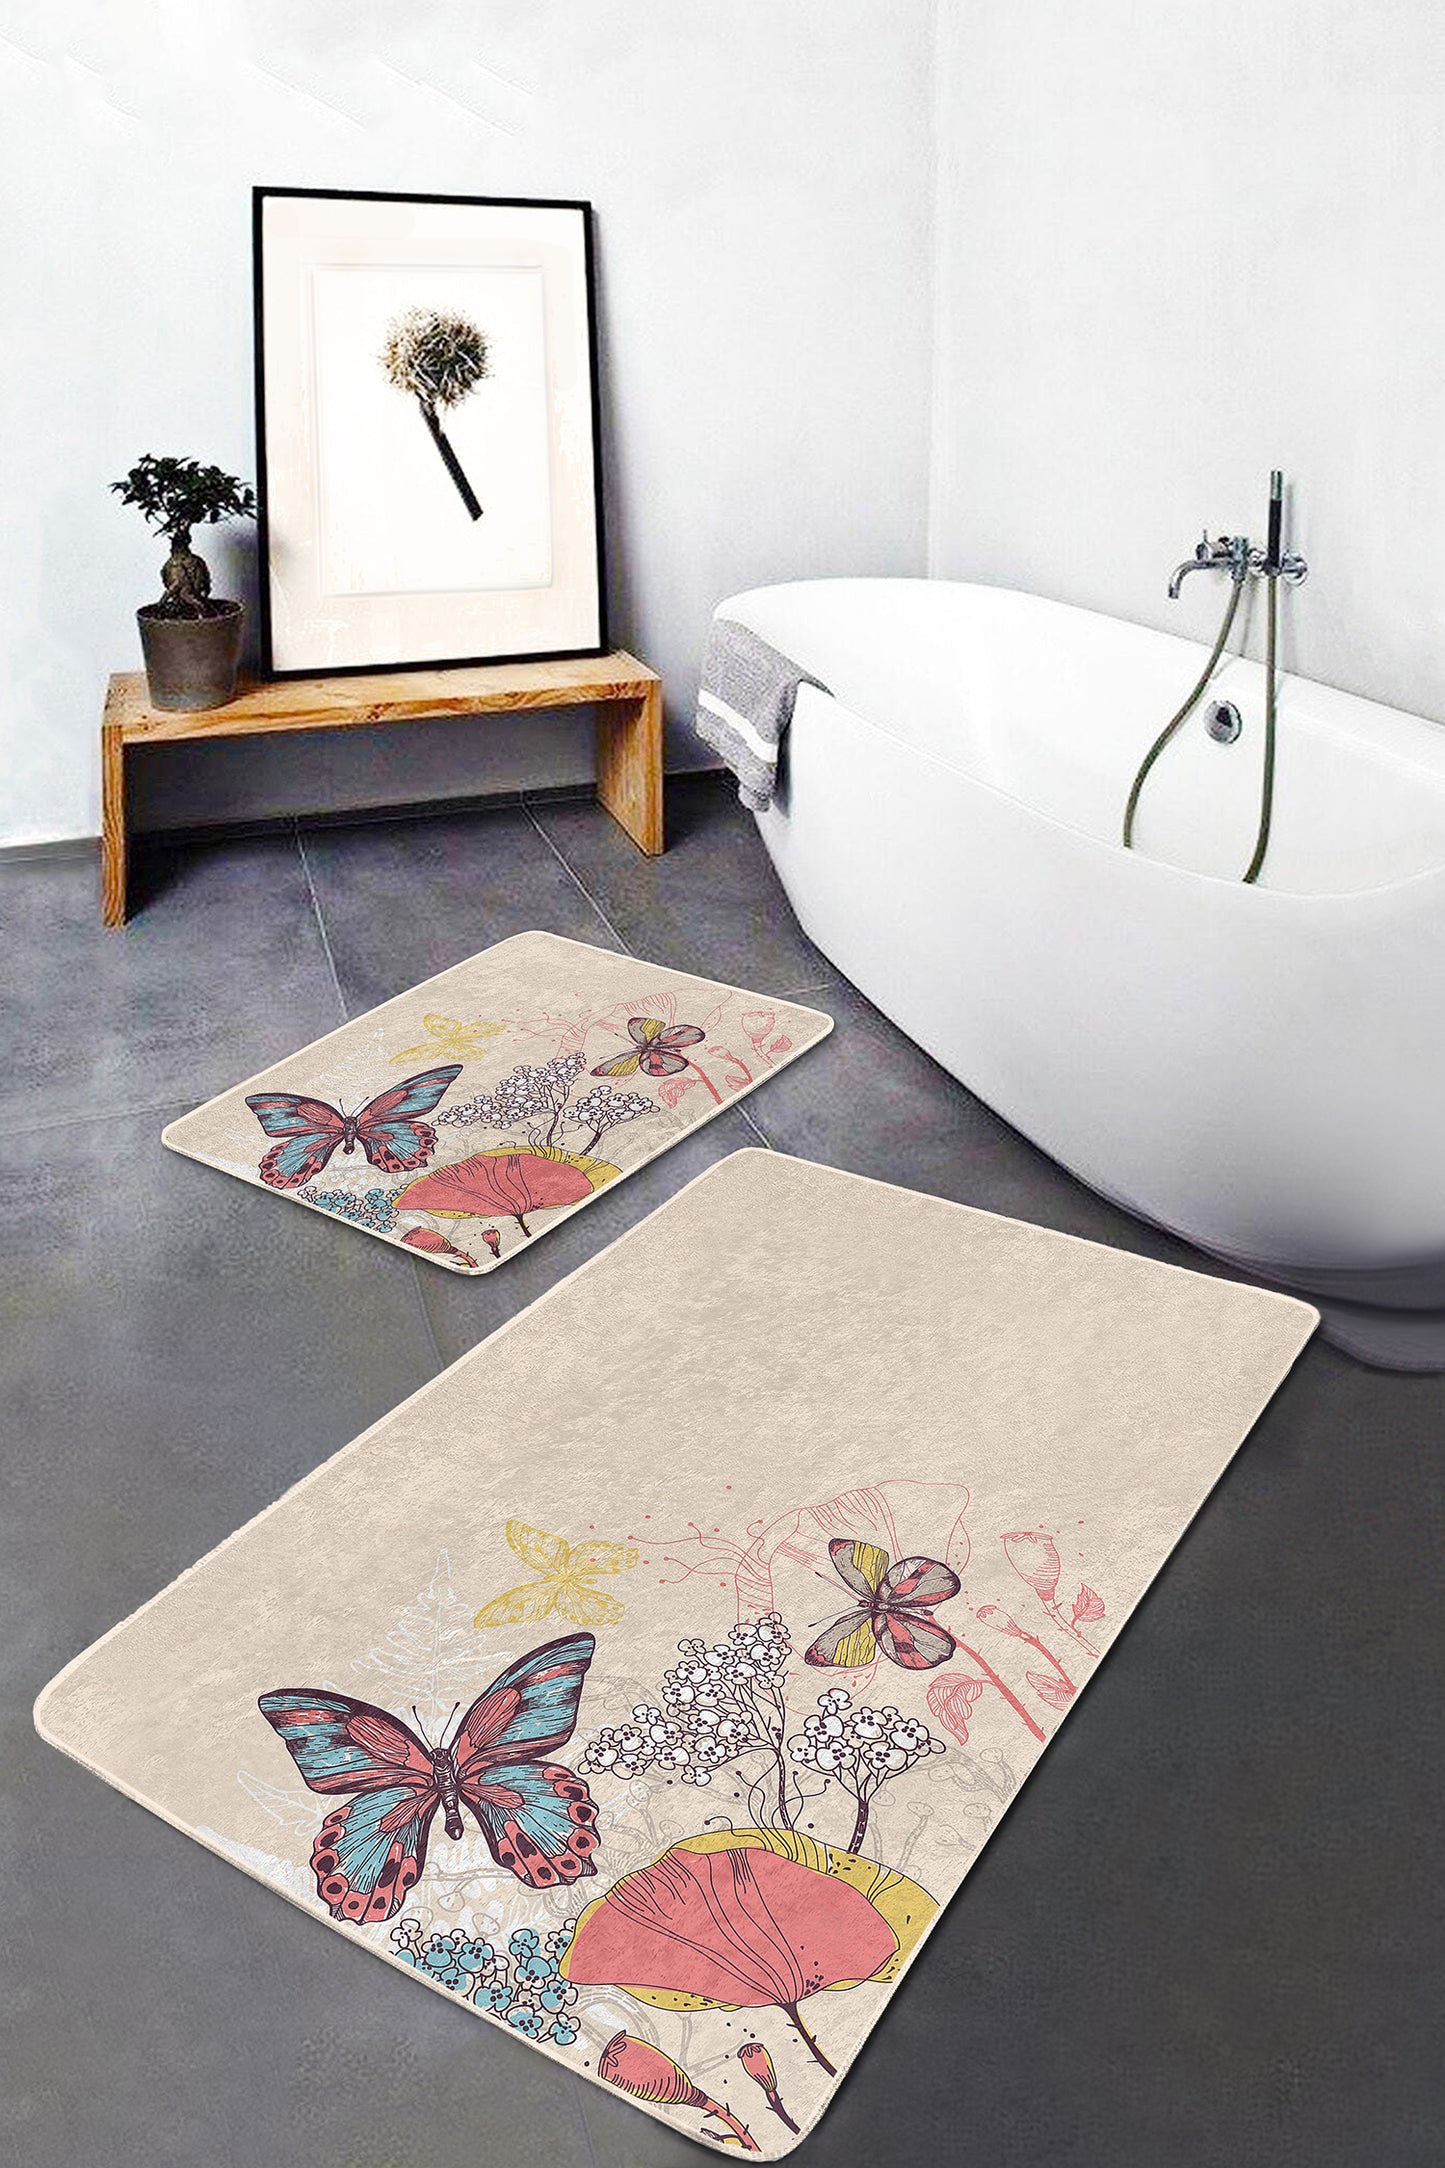 Decorative Bath Mat with a Charming Array of Butterfly on Flowers Patterns